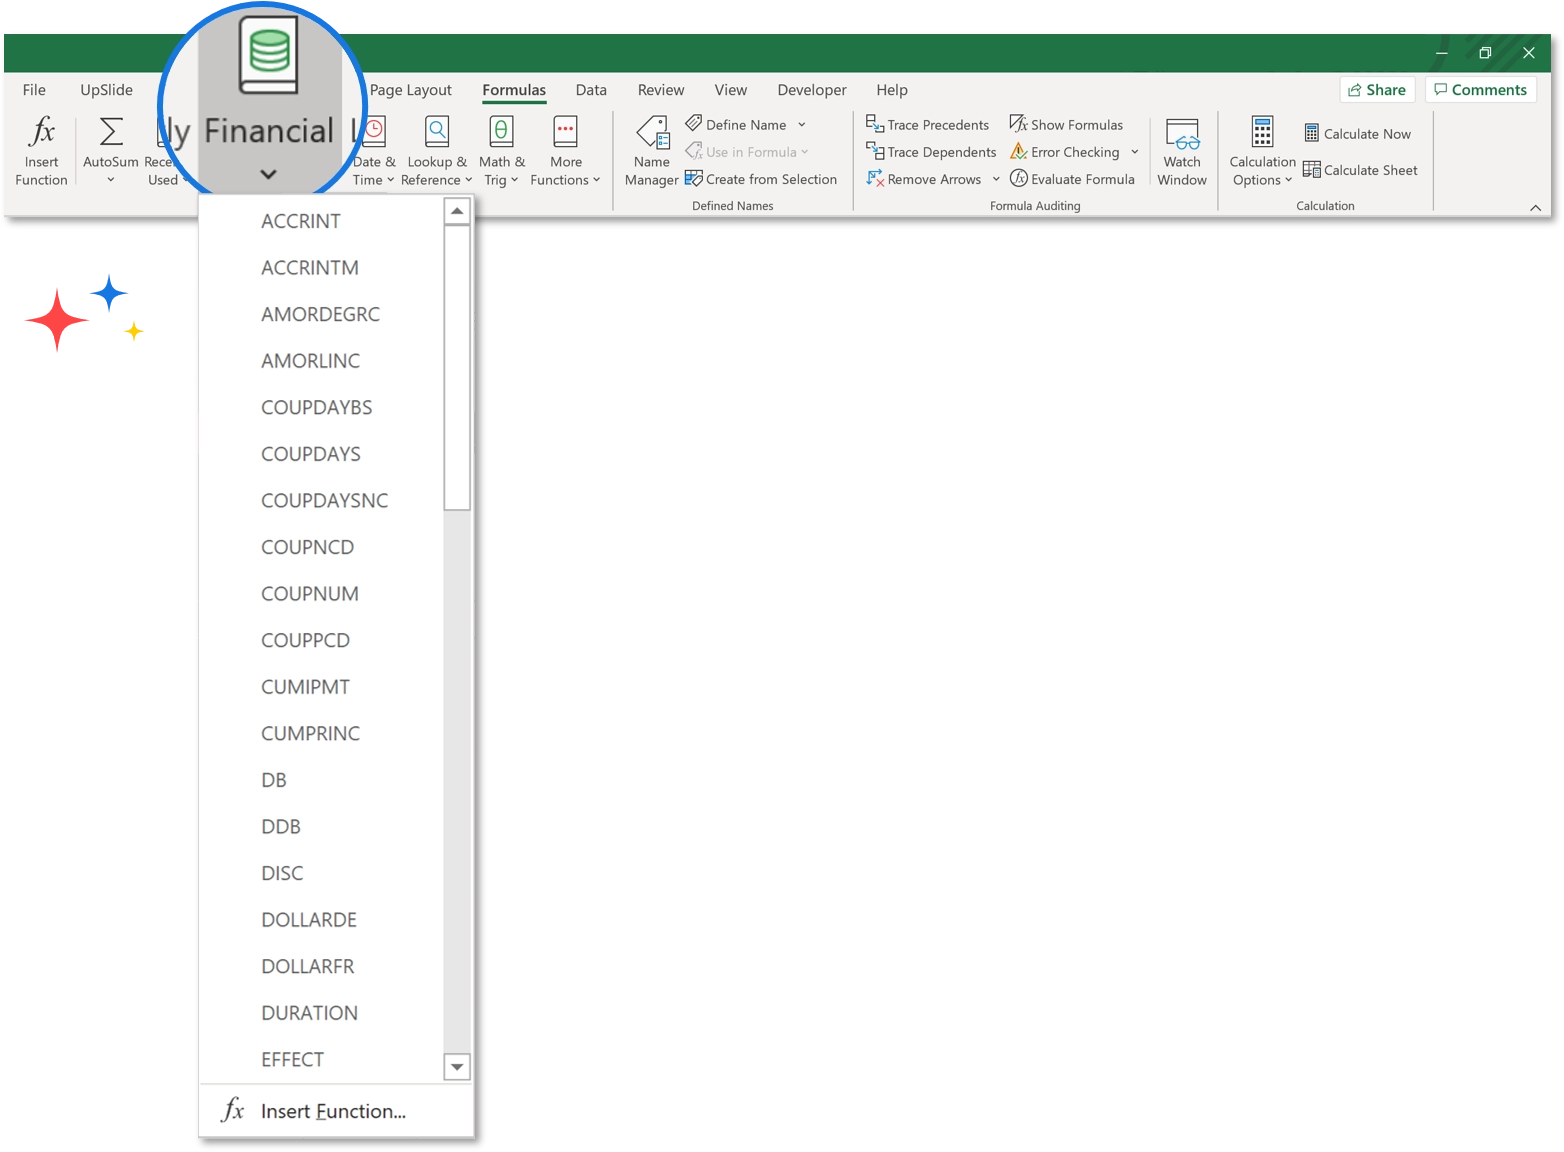 A picture showing all the different financial functions in Excel.